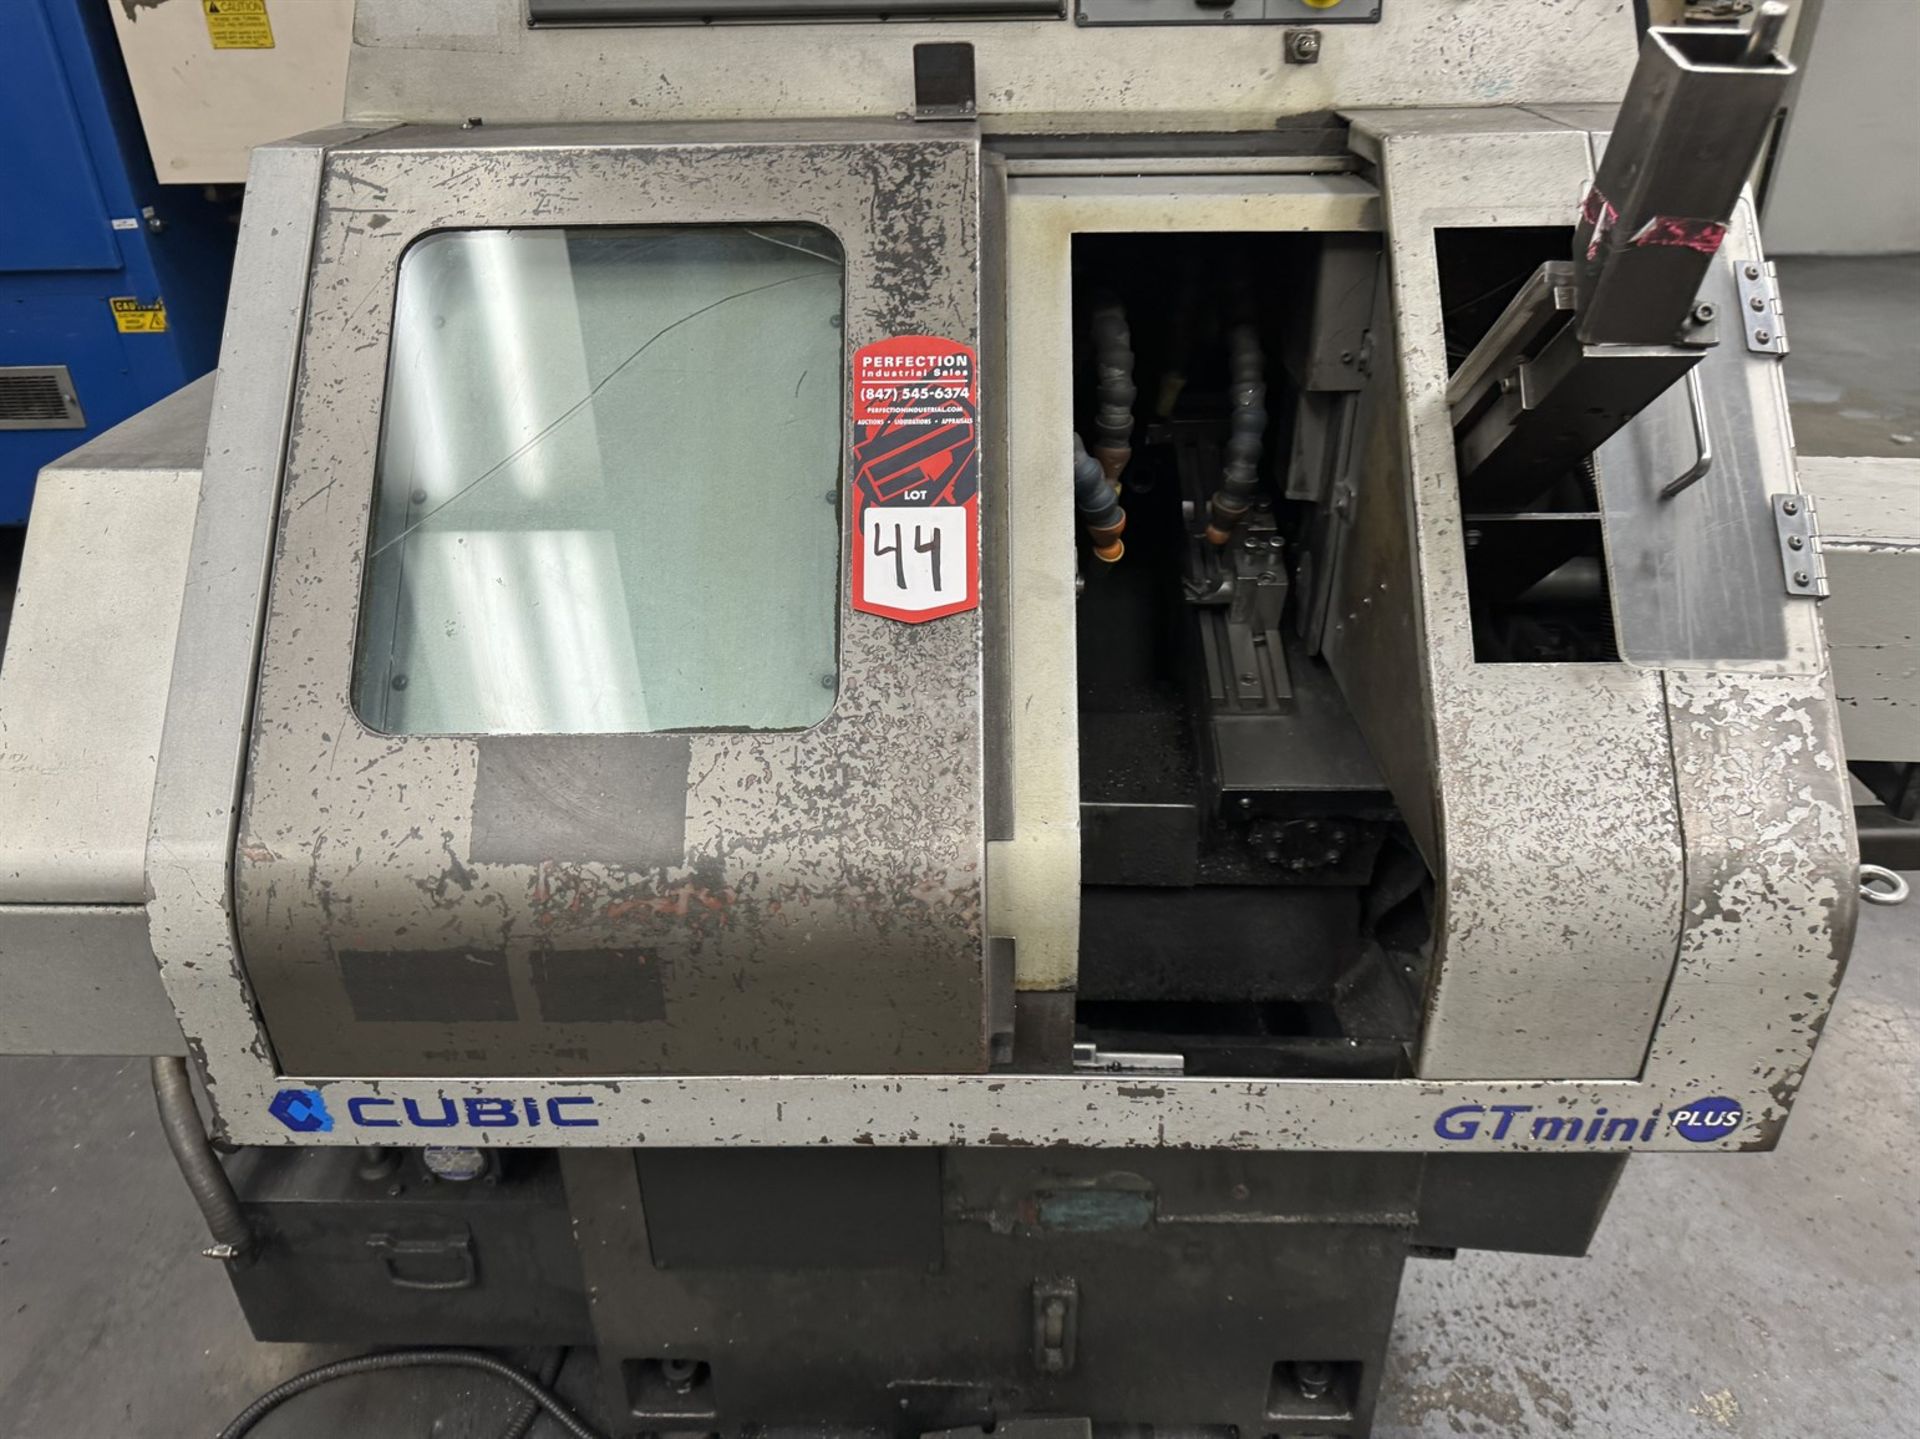 CUBIC GT-MINI Plus CNC Gang Tool Lathe, s/n 8801087, Fanuc Series Oi Mate-TD Control, 60mm Turning D - Image 3 of 9